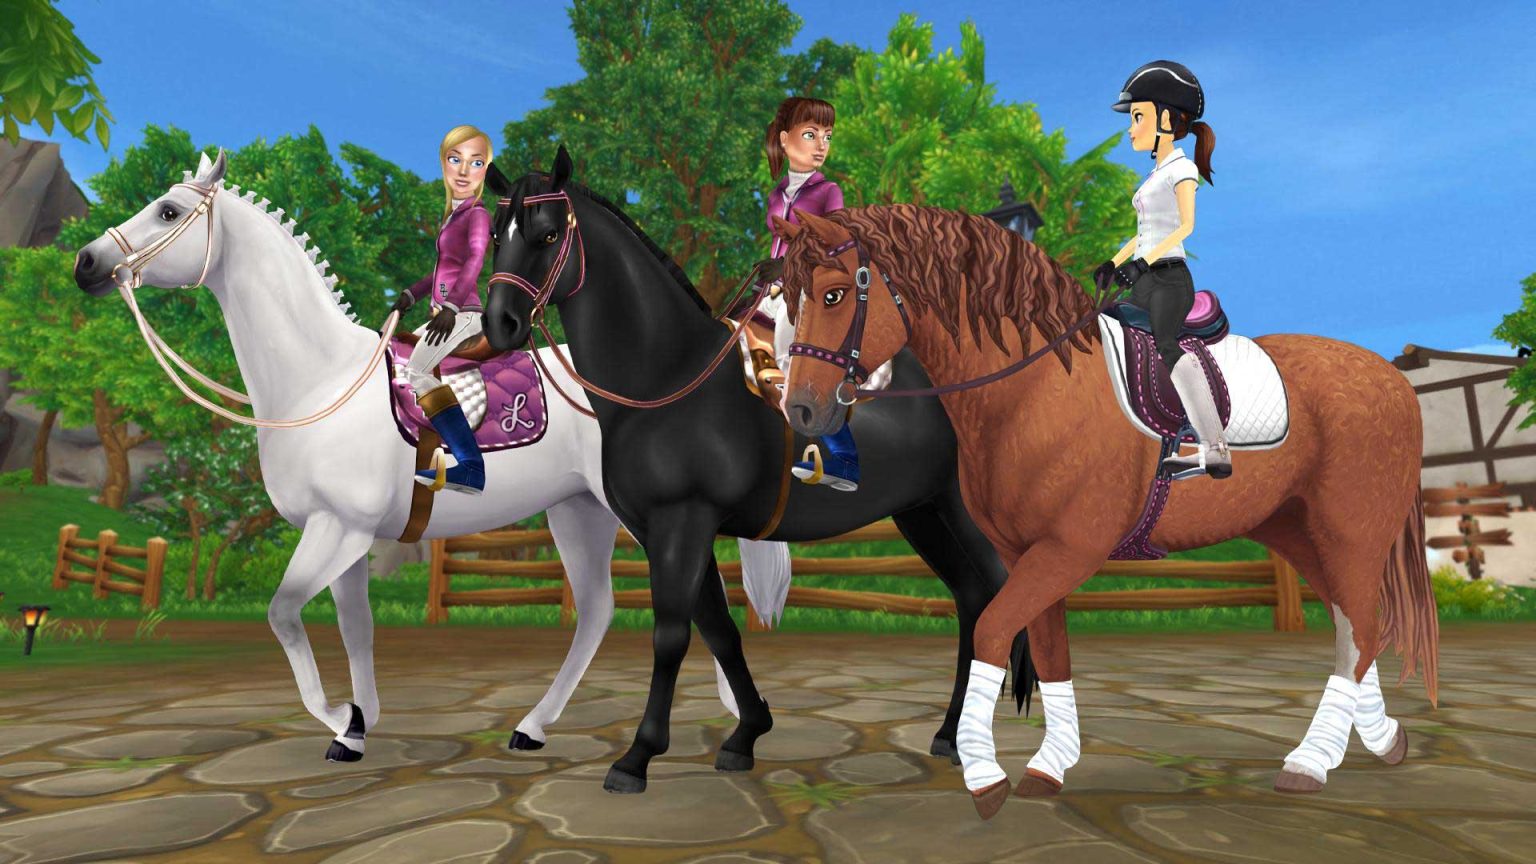 star stable codes 2021 april